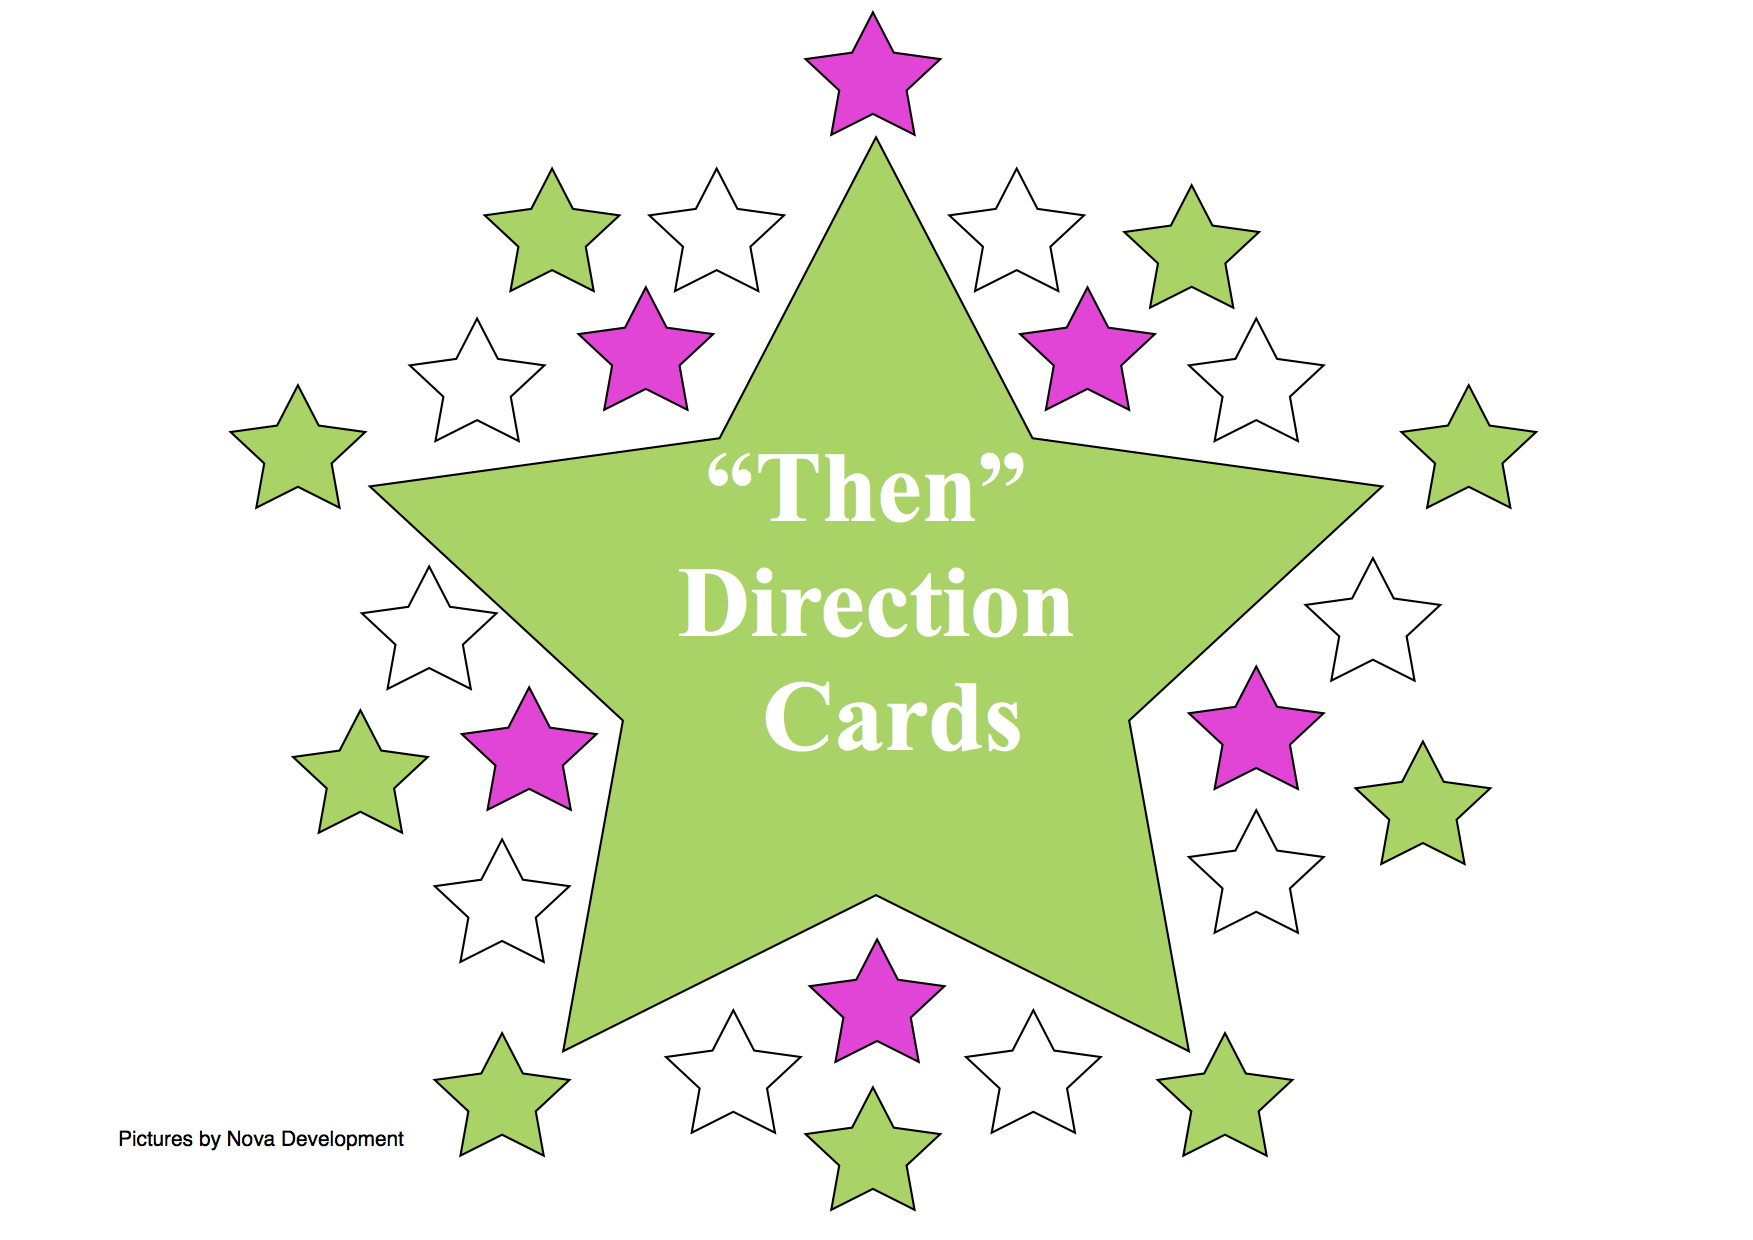 'Then' - Following Direction Cards